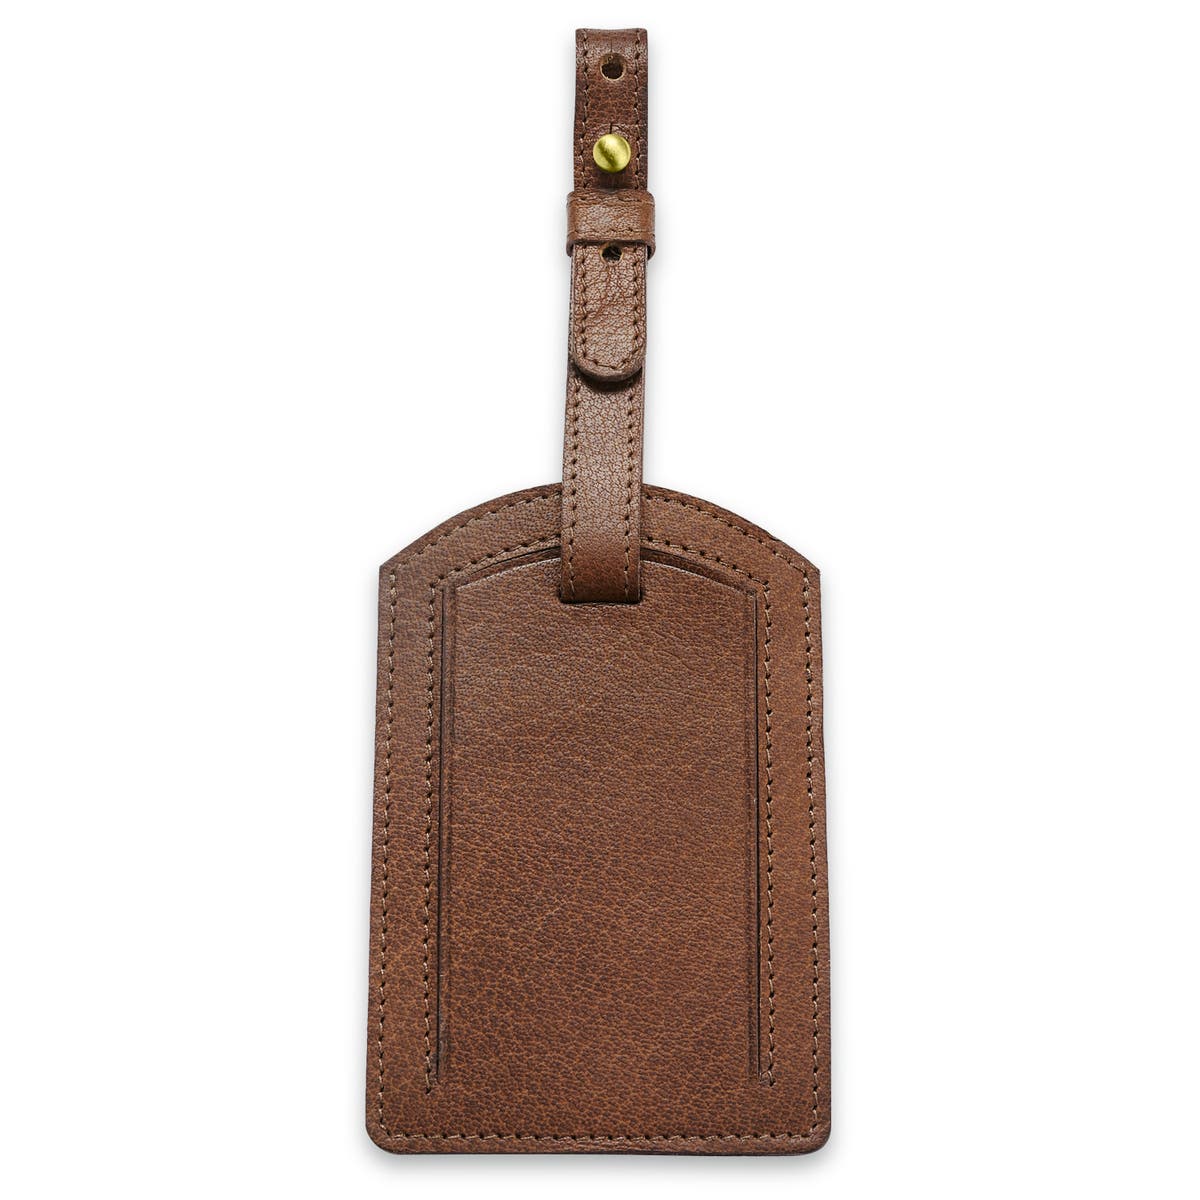 Luggage Tag | Black Full-Grain Buffalo Leather | Rounded - for Men - Trendhim